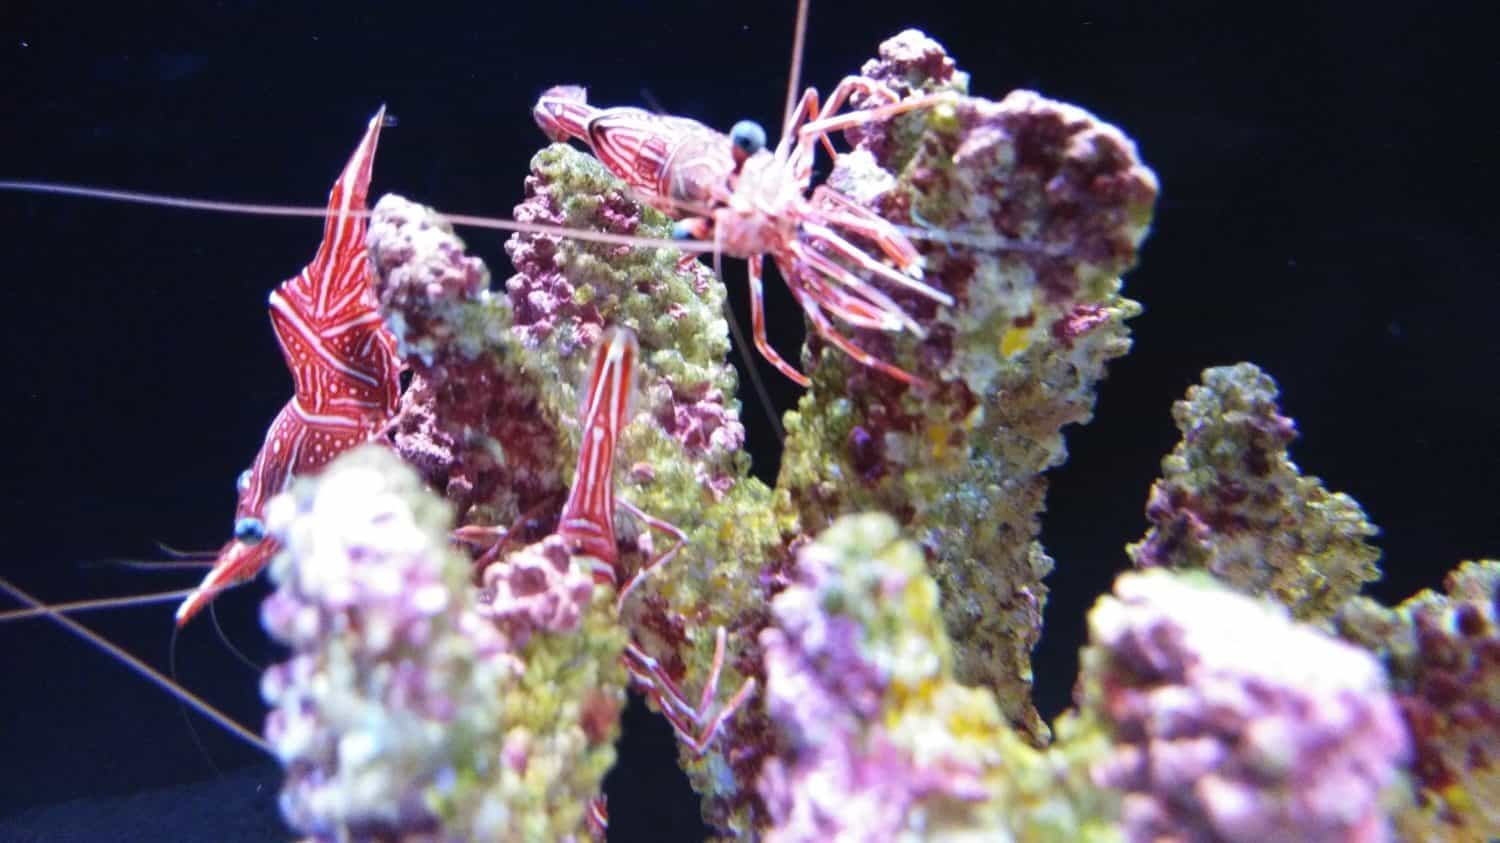 Baby lobsters at the coral in the aquaria.